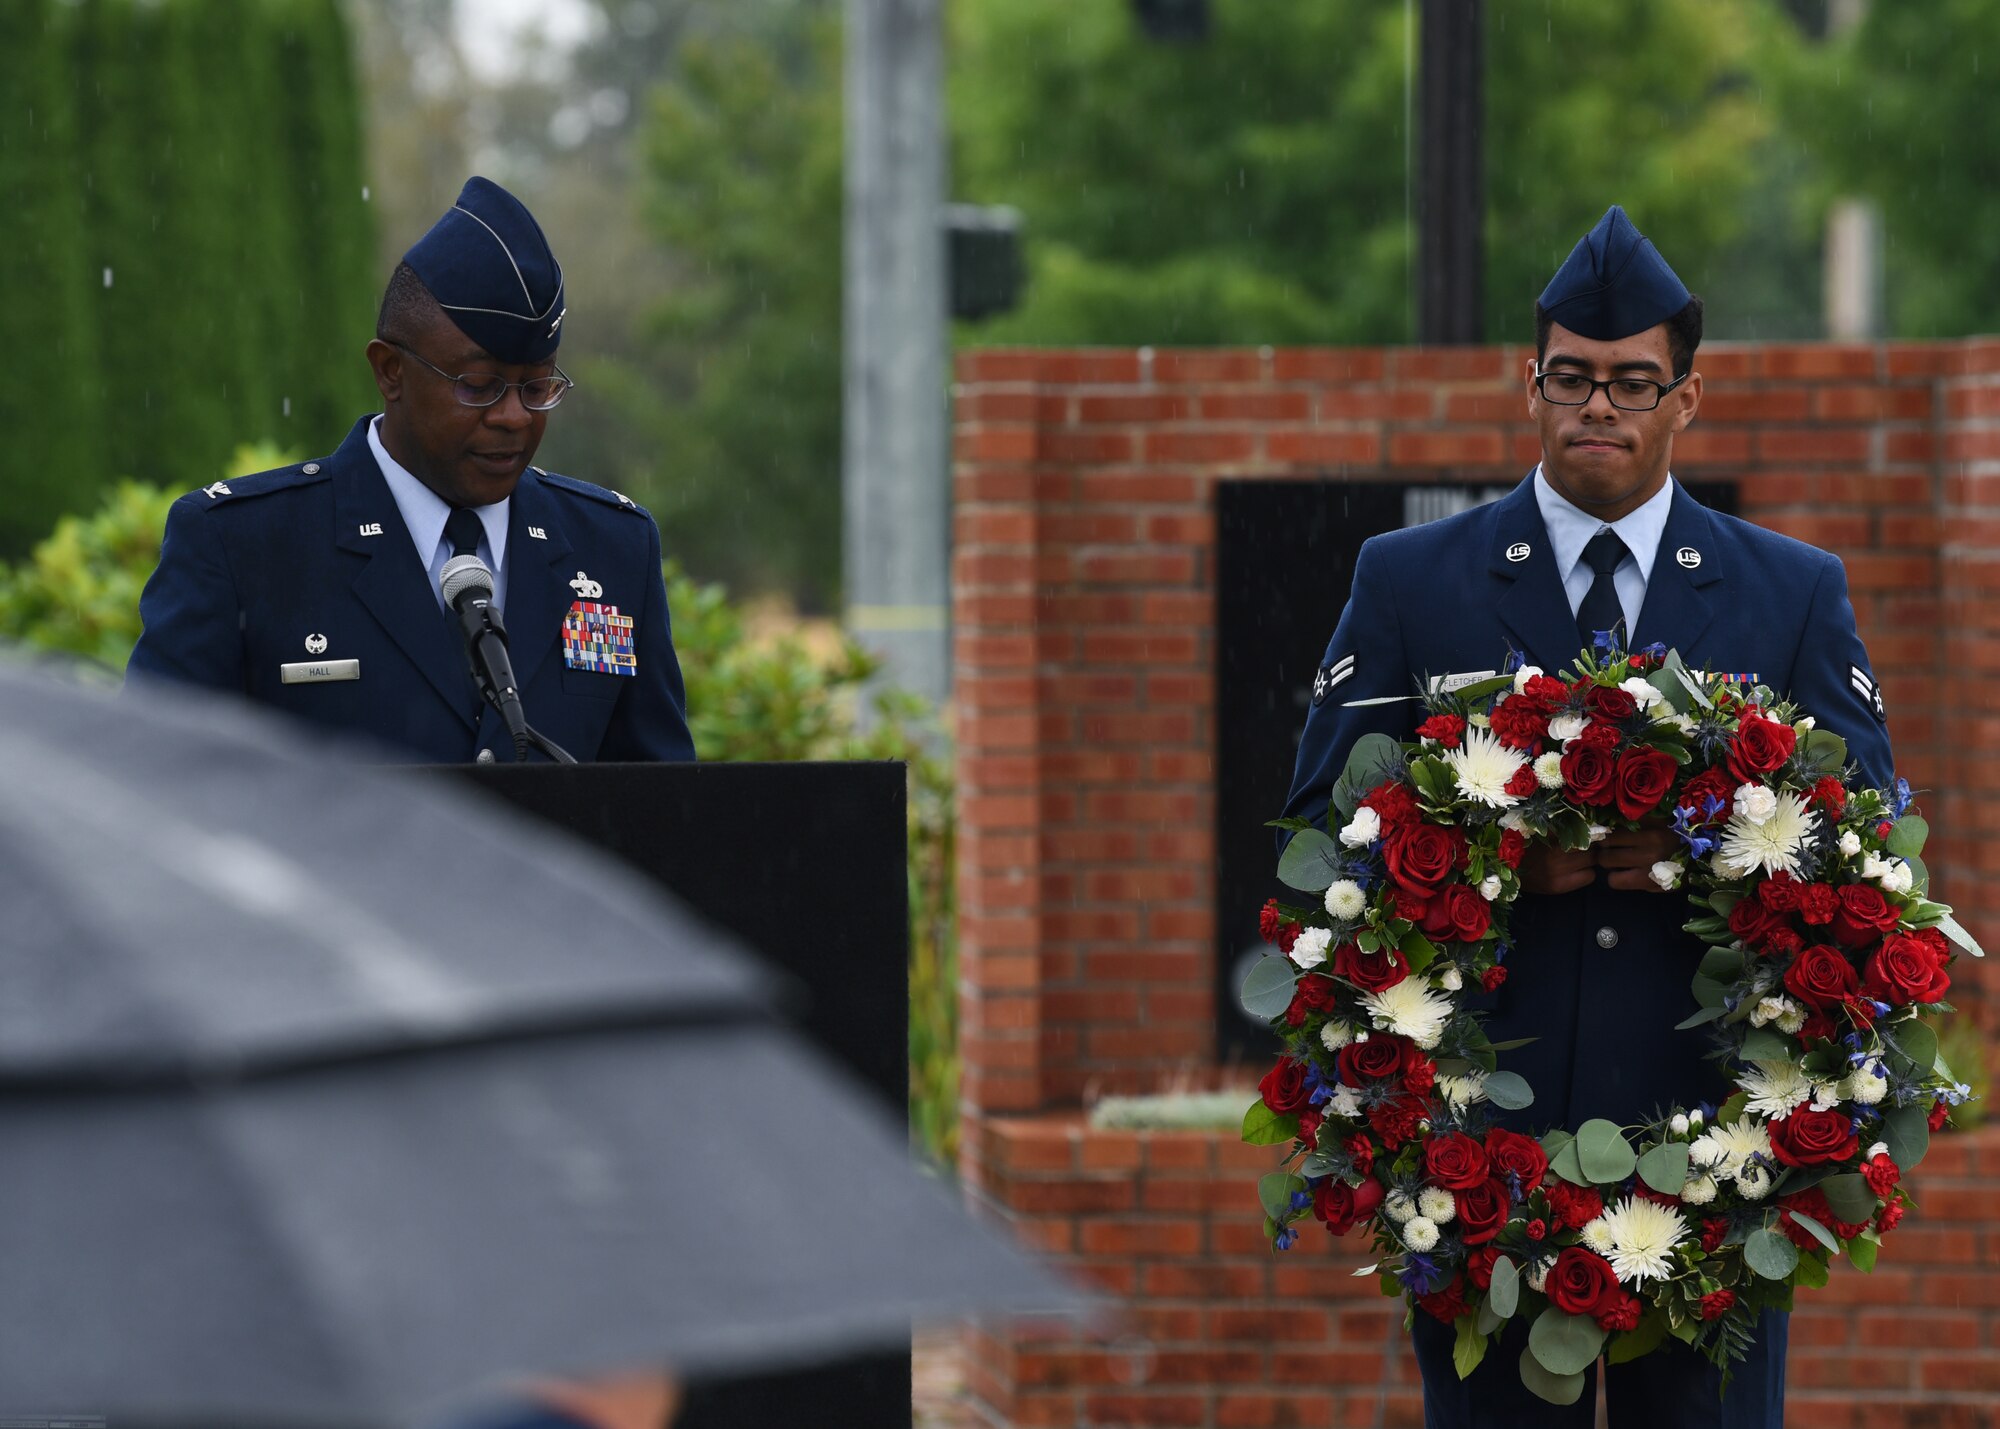 U.S. Air Force Col. Christopher Hall, 627th Air Base Group commander, gives opening remarks during a wreath-laying ceremony at the McChord War Memorial at Joint Base Lewis-McChord, Washington, Sept. 17, 2021. Team McChord Airmen gathered at the memorial for the POW/MIA wreath-laying ceremony to pay their respects to the more than 81,000 American heroes who were, and may still be, missing in action and those who were prisoners of war. (U.S. Air Force photo by Senior Airman Zoe Thacker)